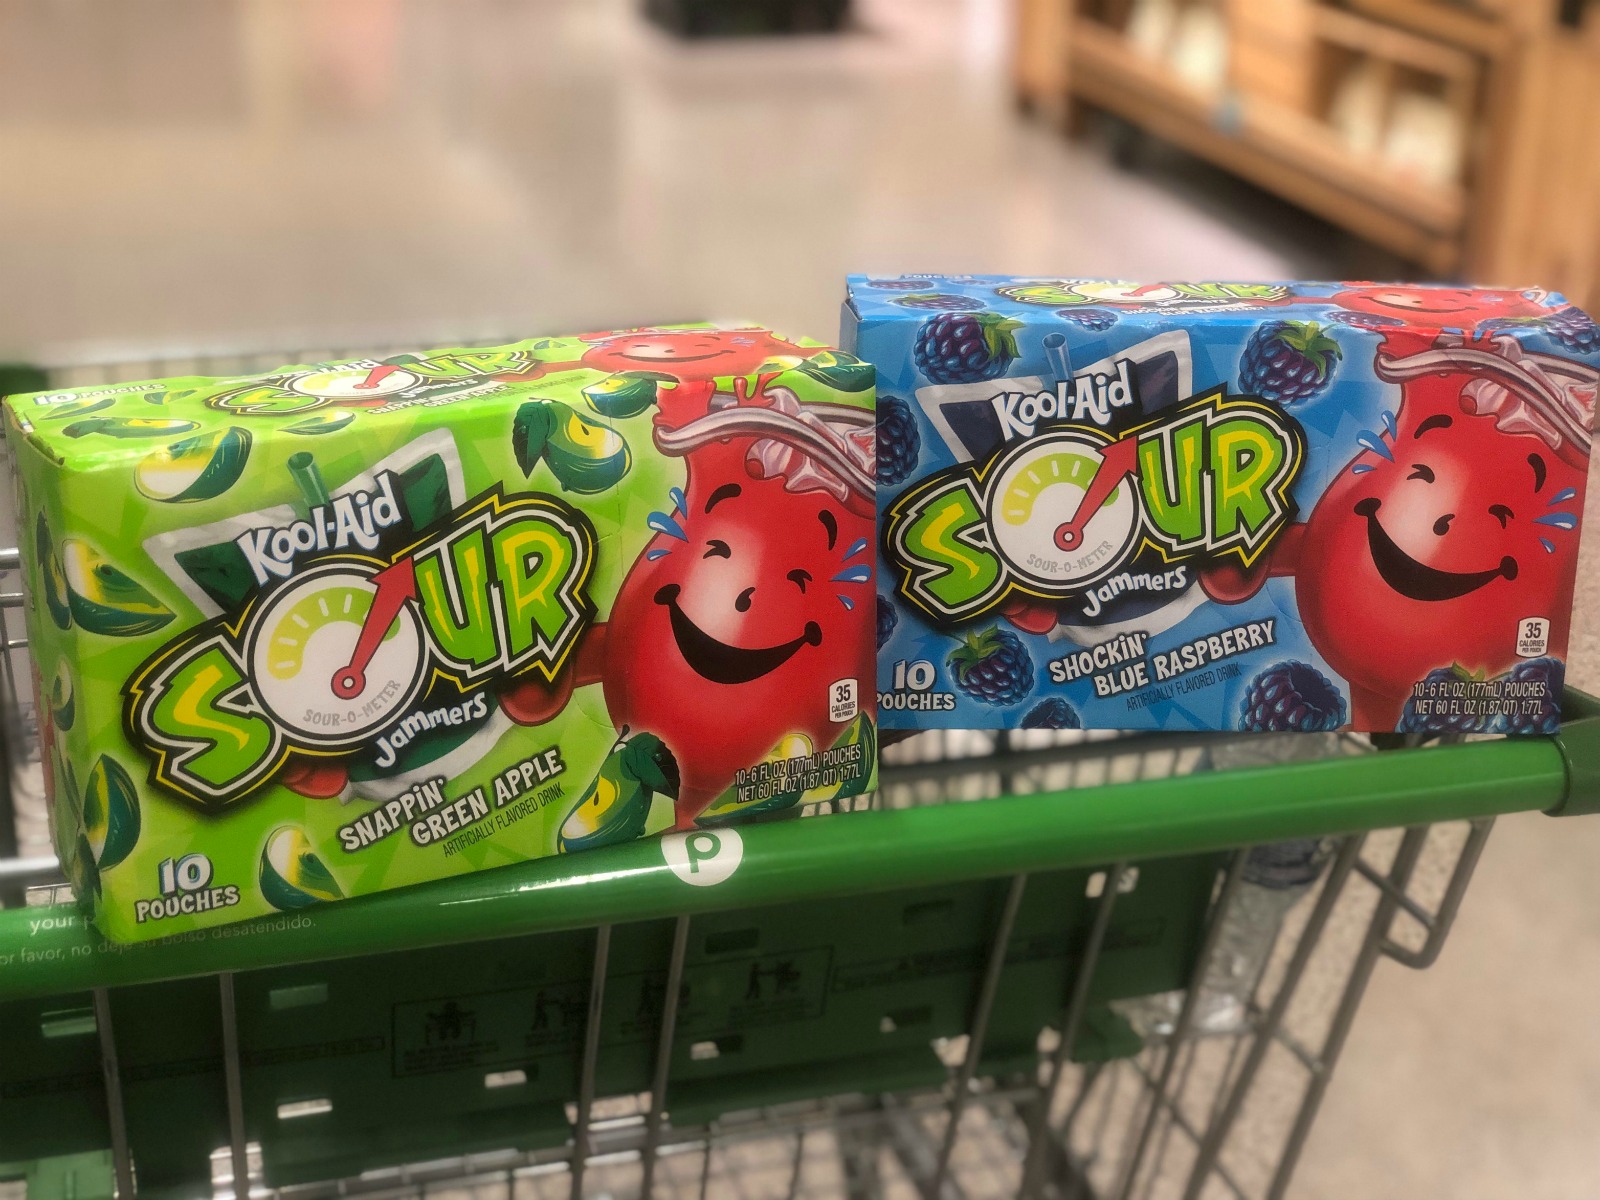 Look For New Kool-Aid Jammers Sours At Publix - Find Two Tasty Flavors & Save With A Coupon on I Heart Publix